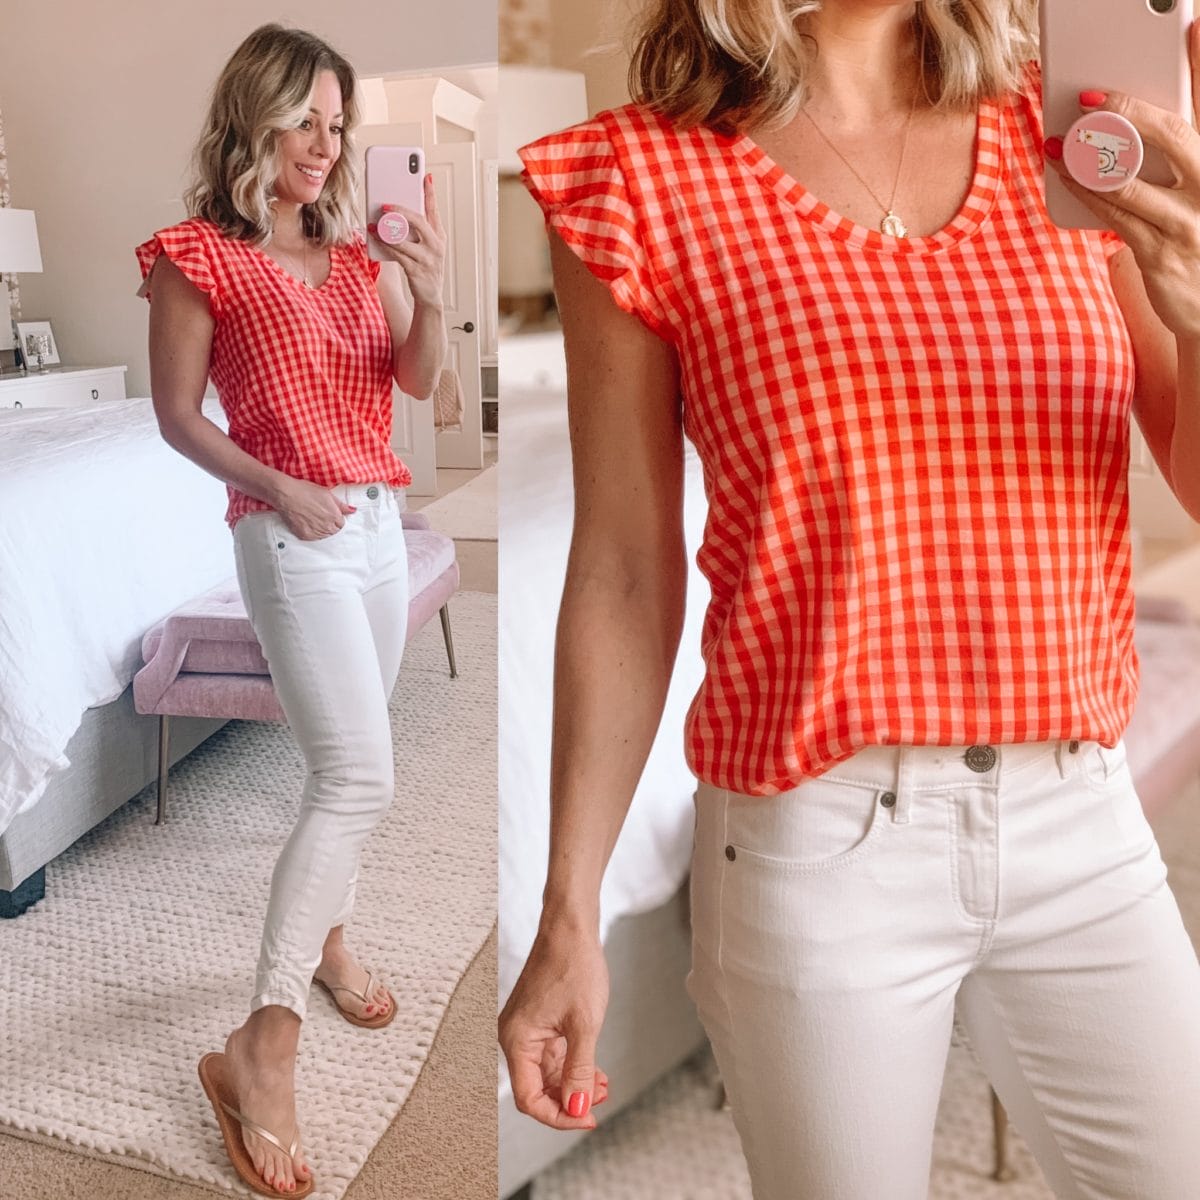 Gingham Check Ruffle Sleeve Top, White Cinched Hem Jeans, Gold Flip Flops 